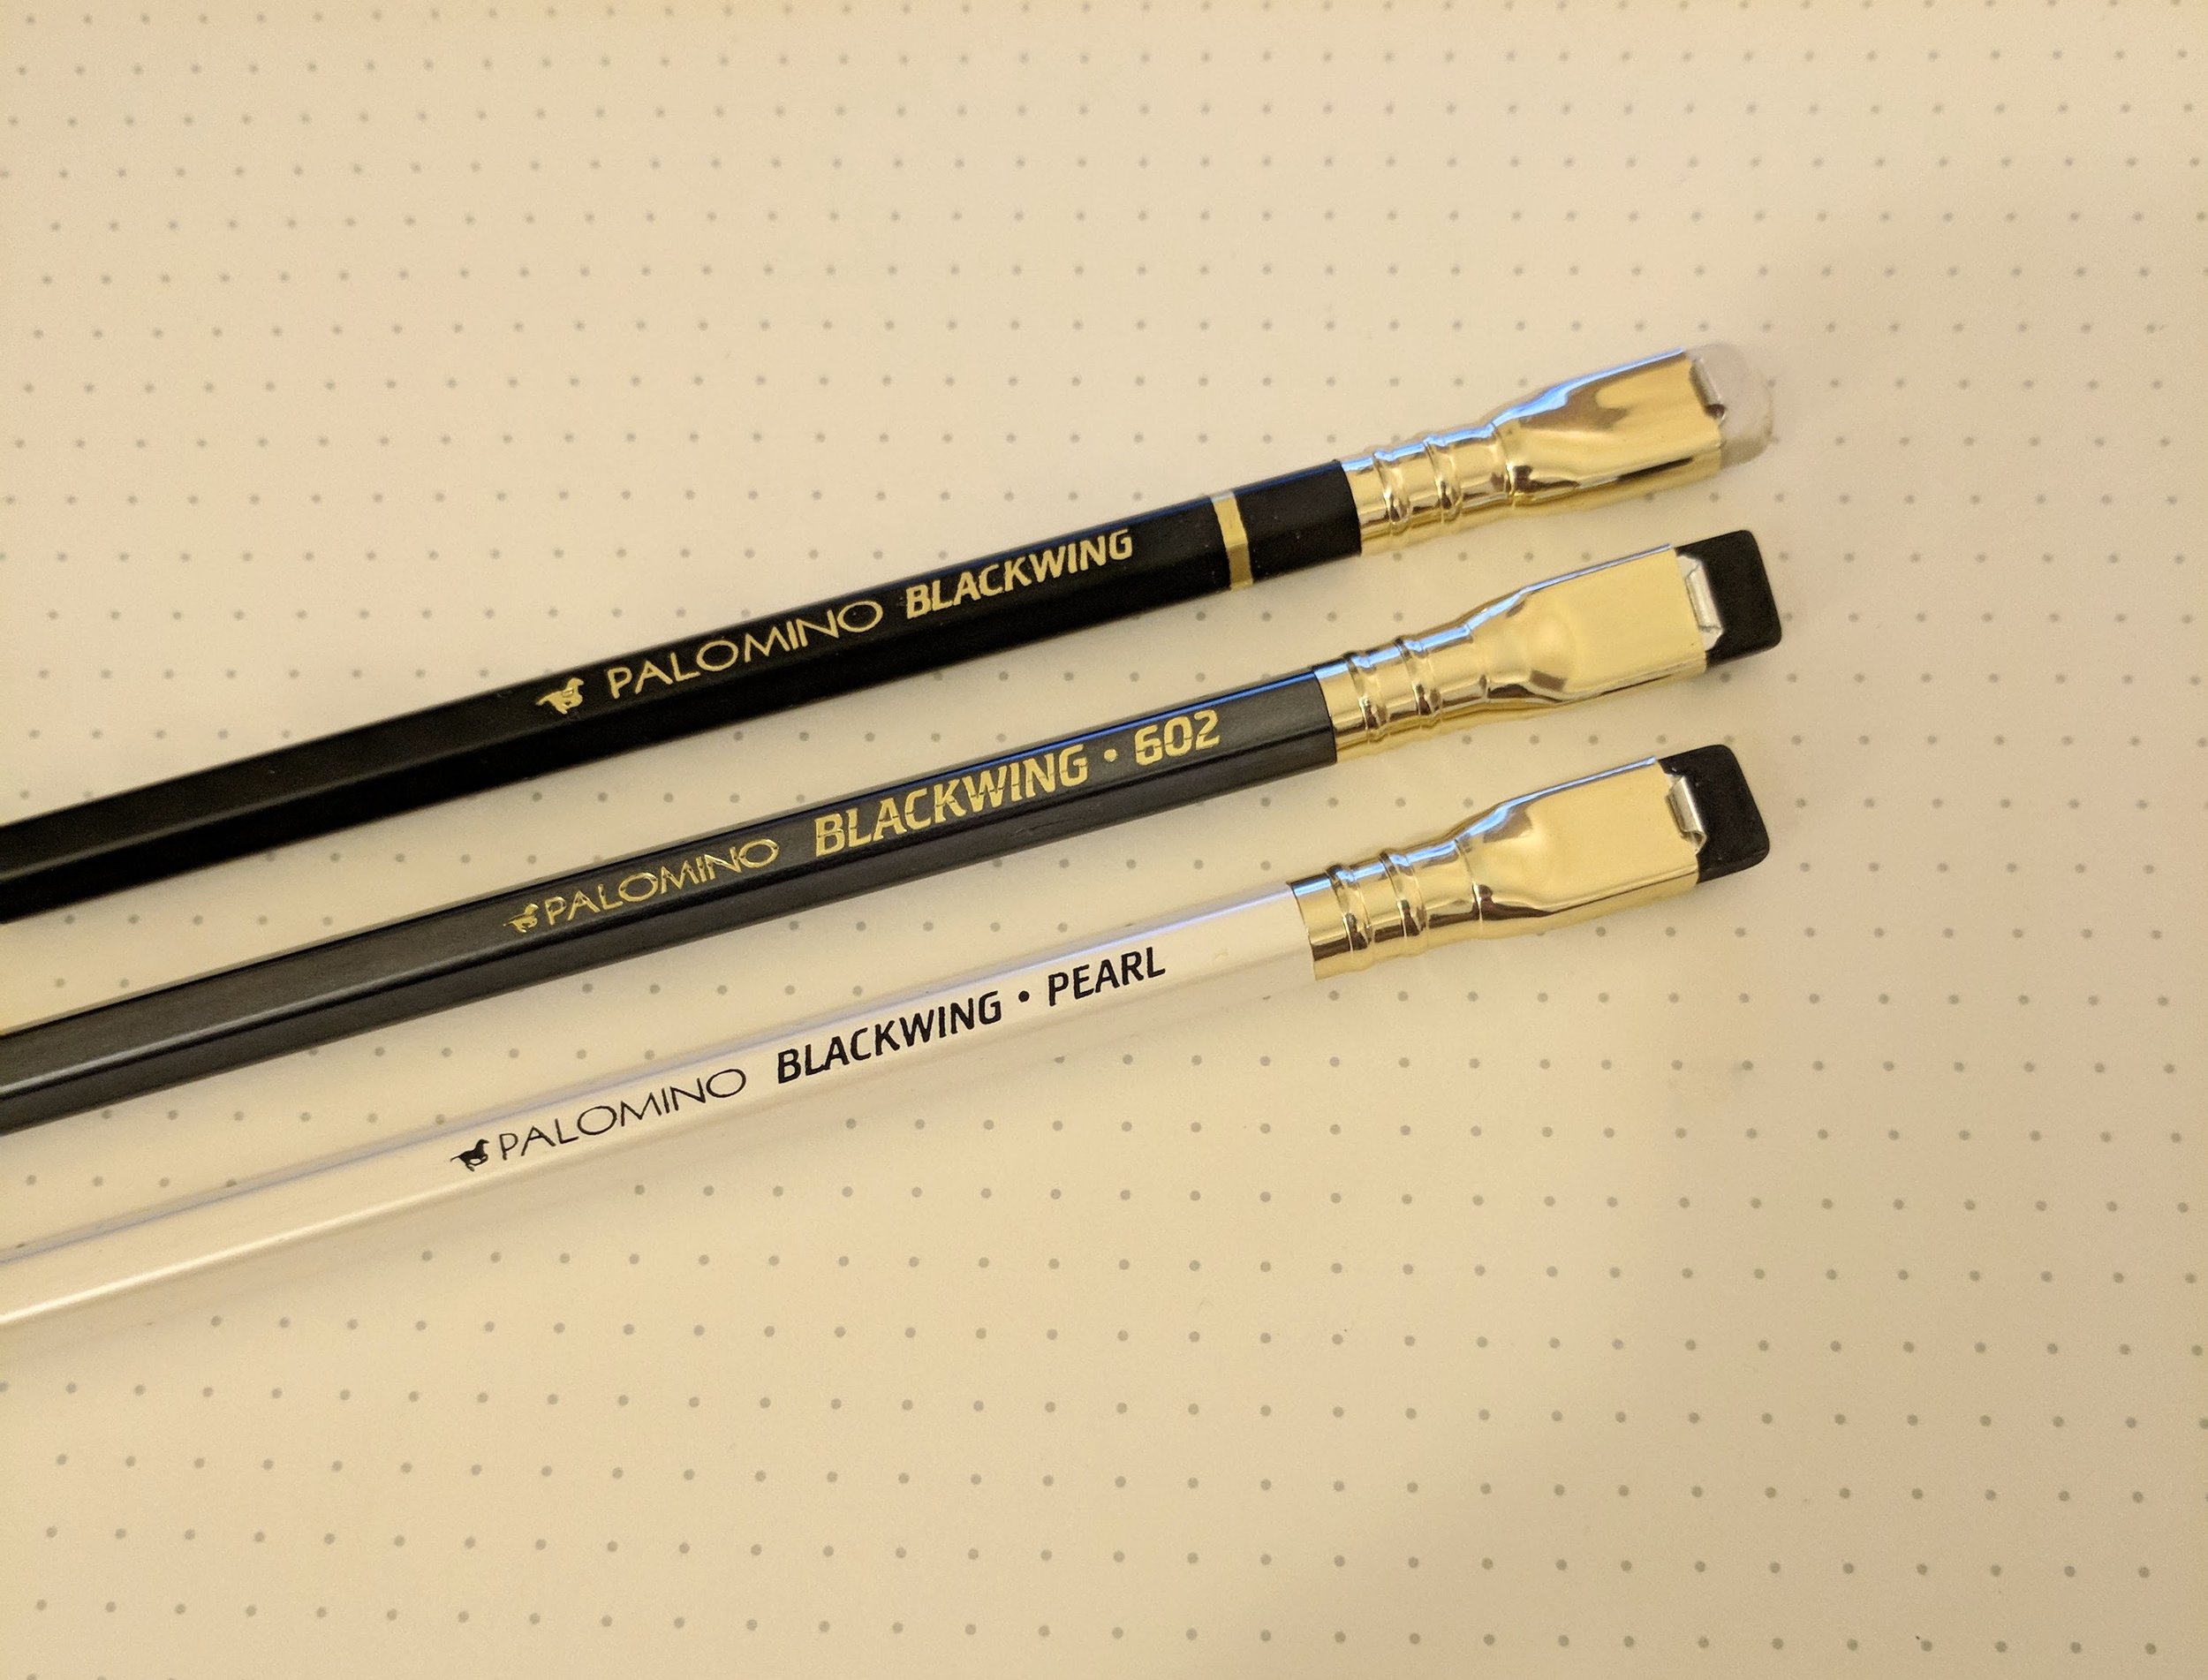 Pencil Review: The (Palomino) Blackwing Pearl — The Gentleman Stationer